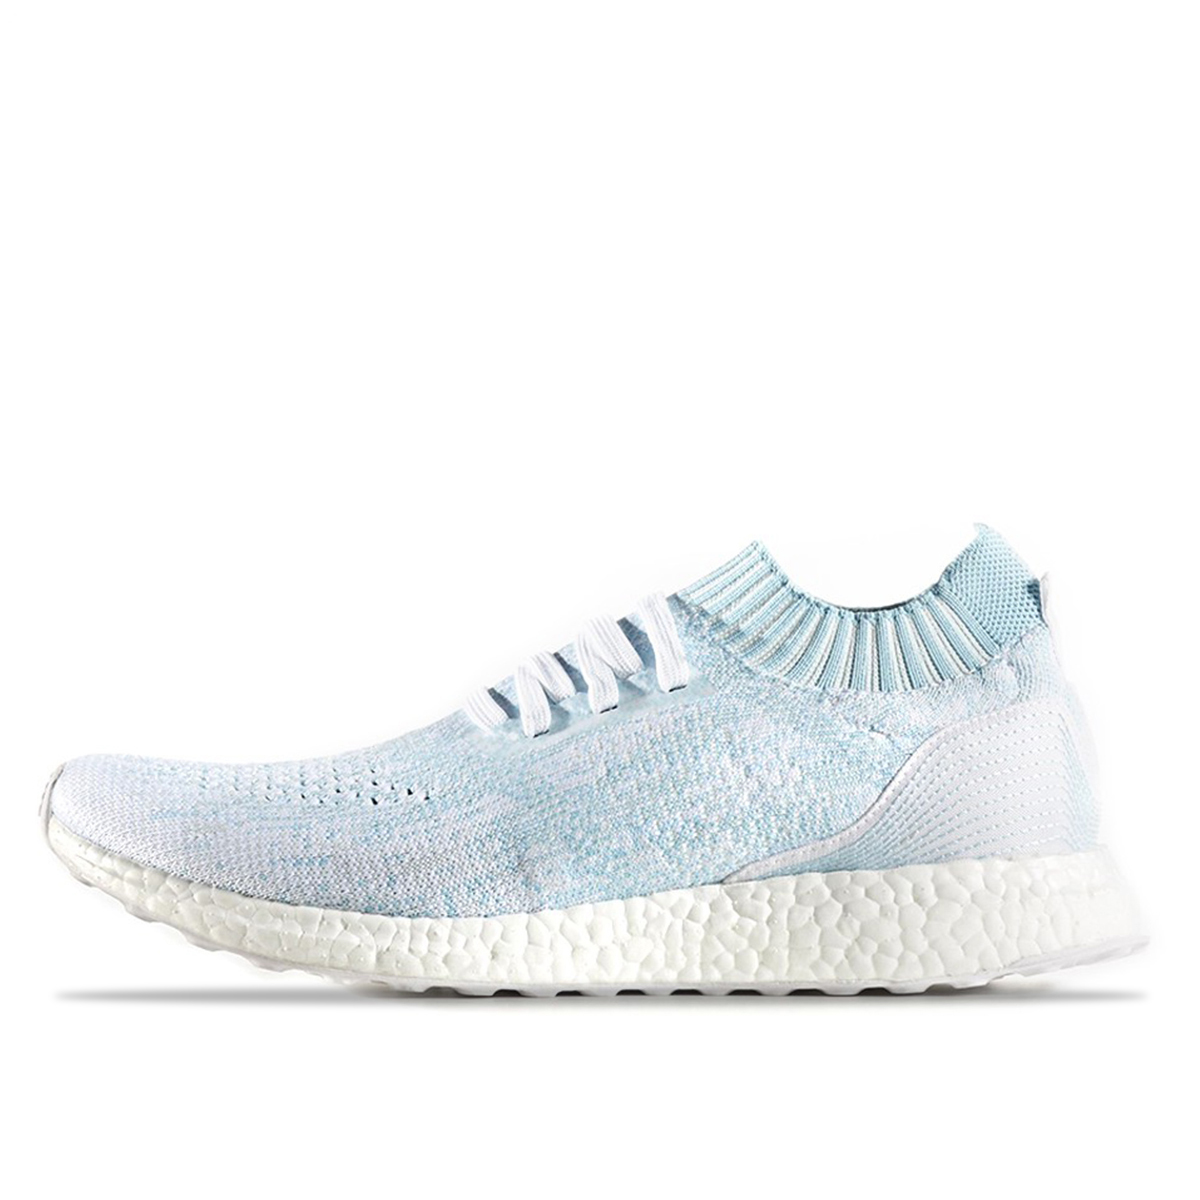 Adidas Ultra Boost Uncaged Parley Coral Bleaching Icey Blue | CP9686 -